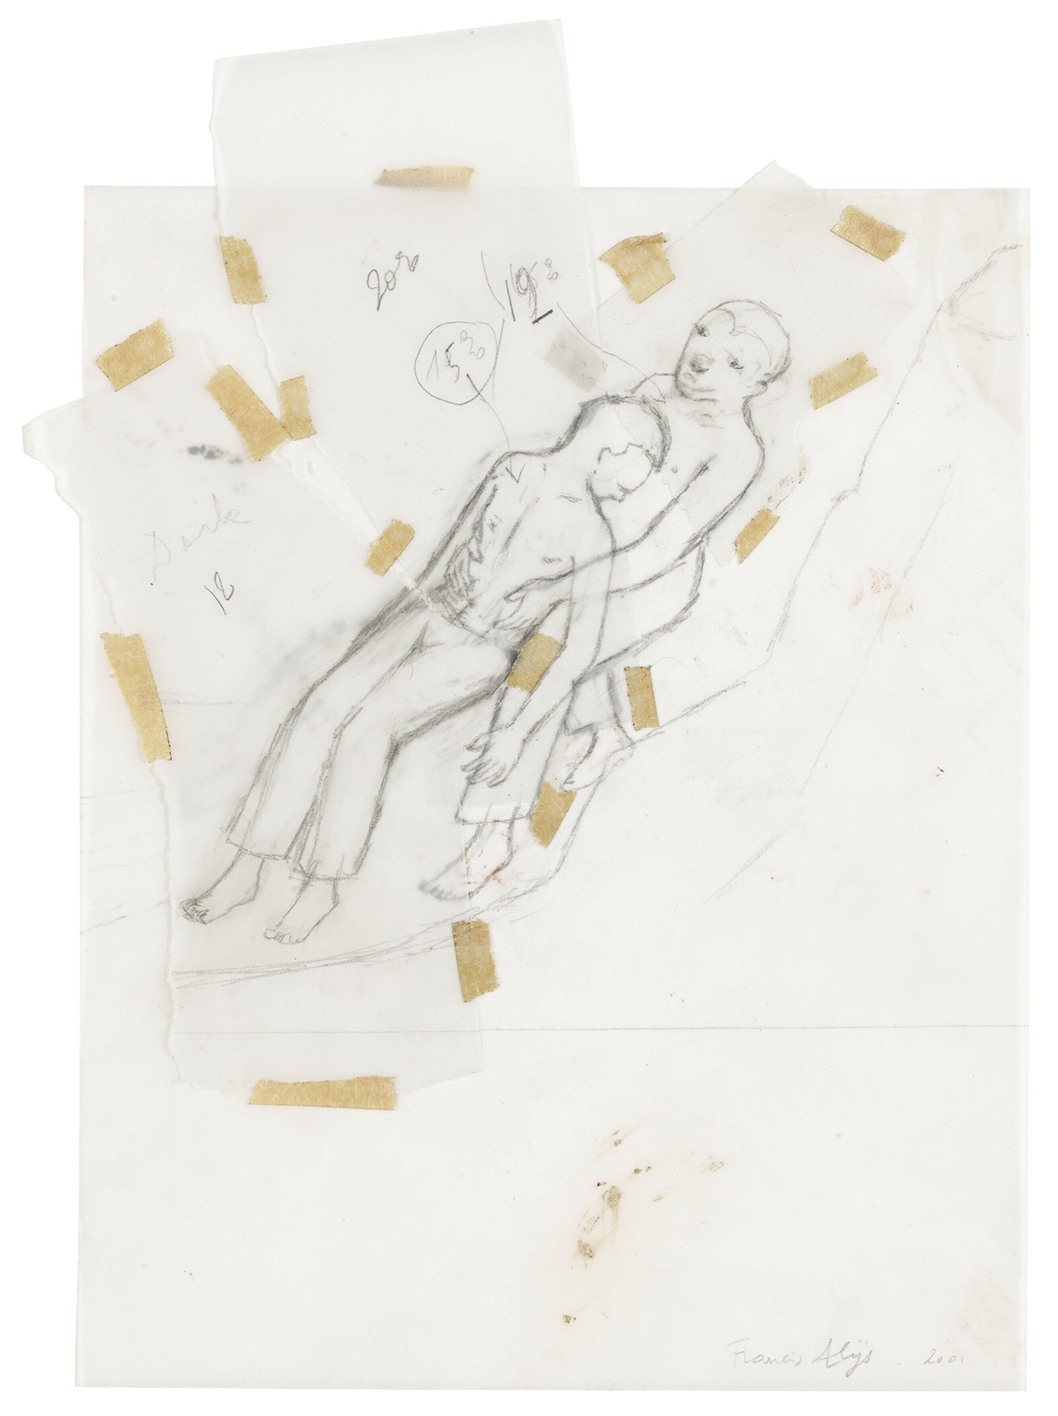 drawing Francis Alÿs | Untitled, 2001 - graphite and adhesive tape on tracing paper collage - contemporary drawing, drawings, work on paper, art on paper, contemporary art